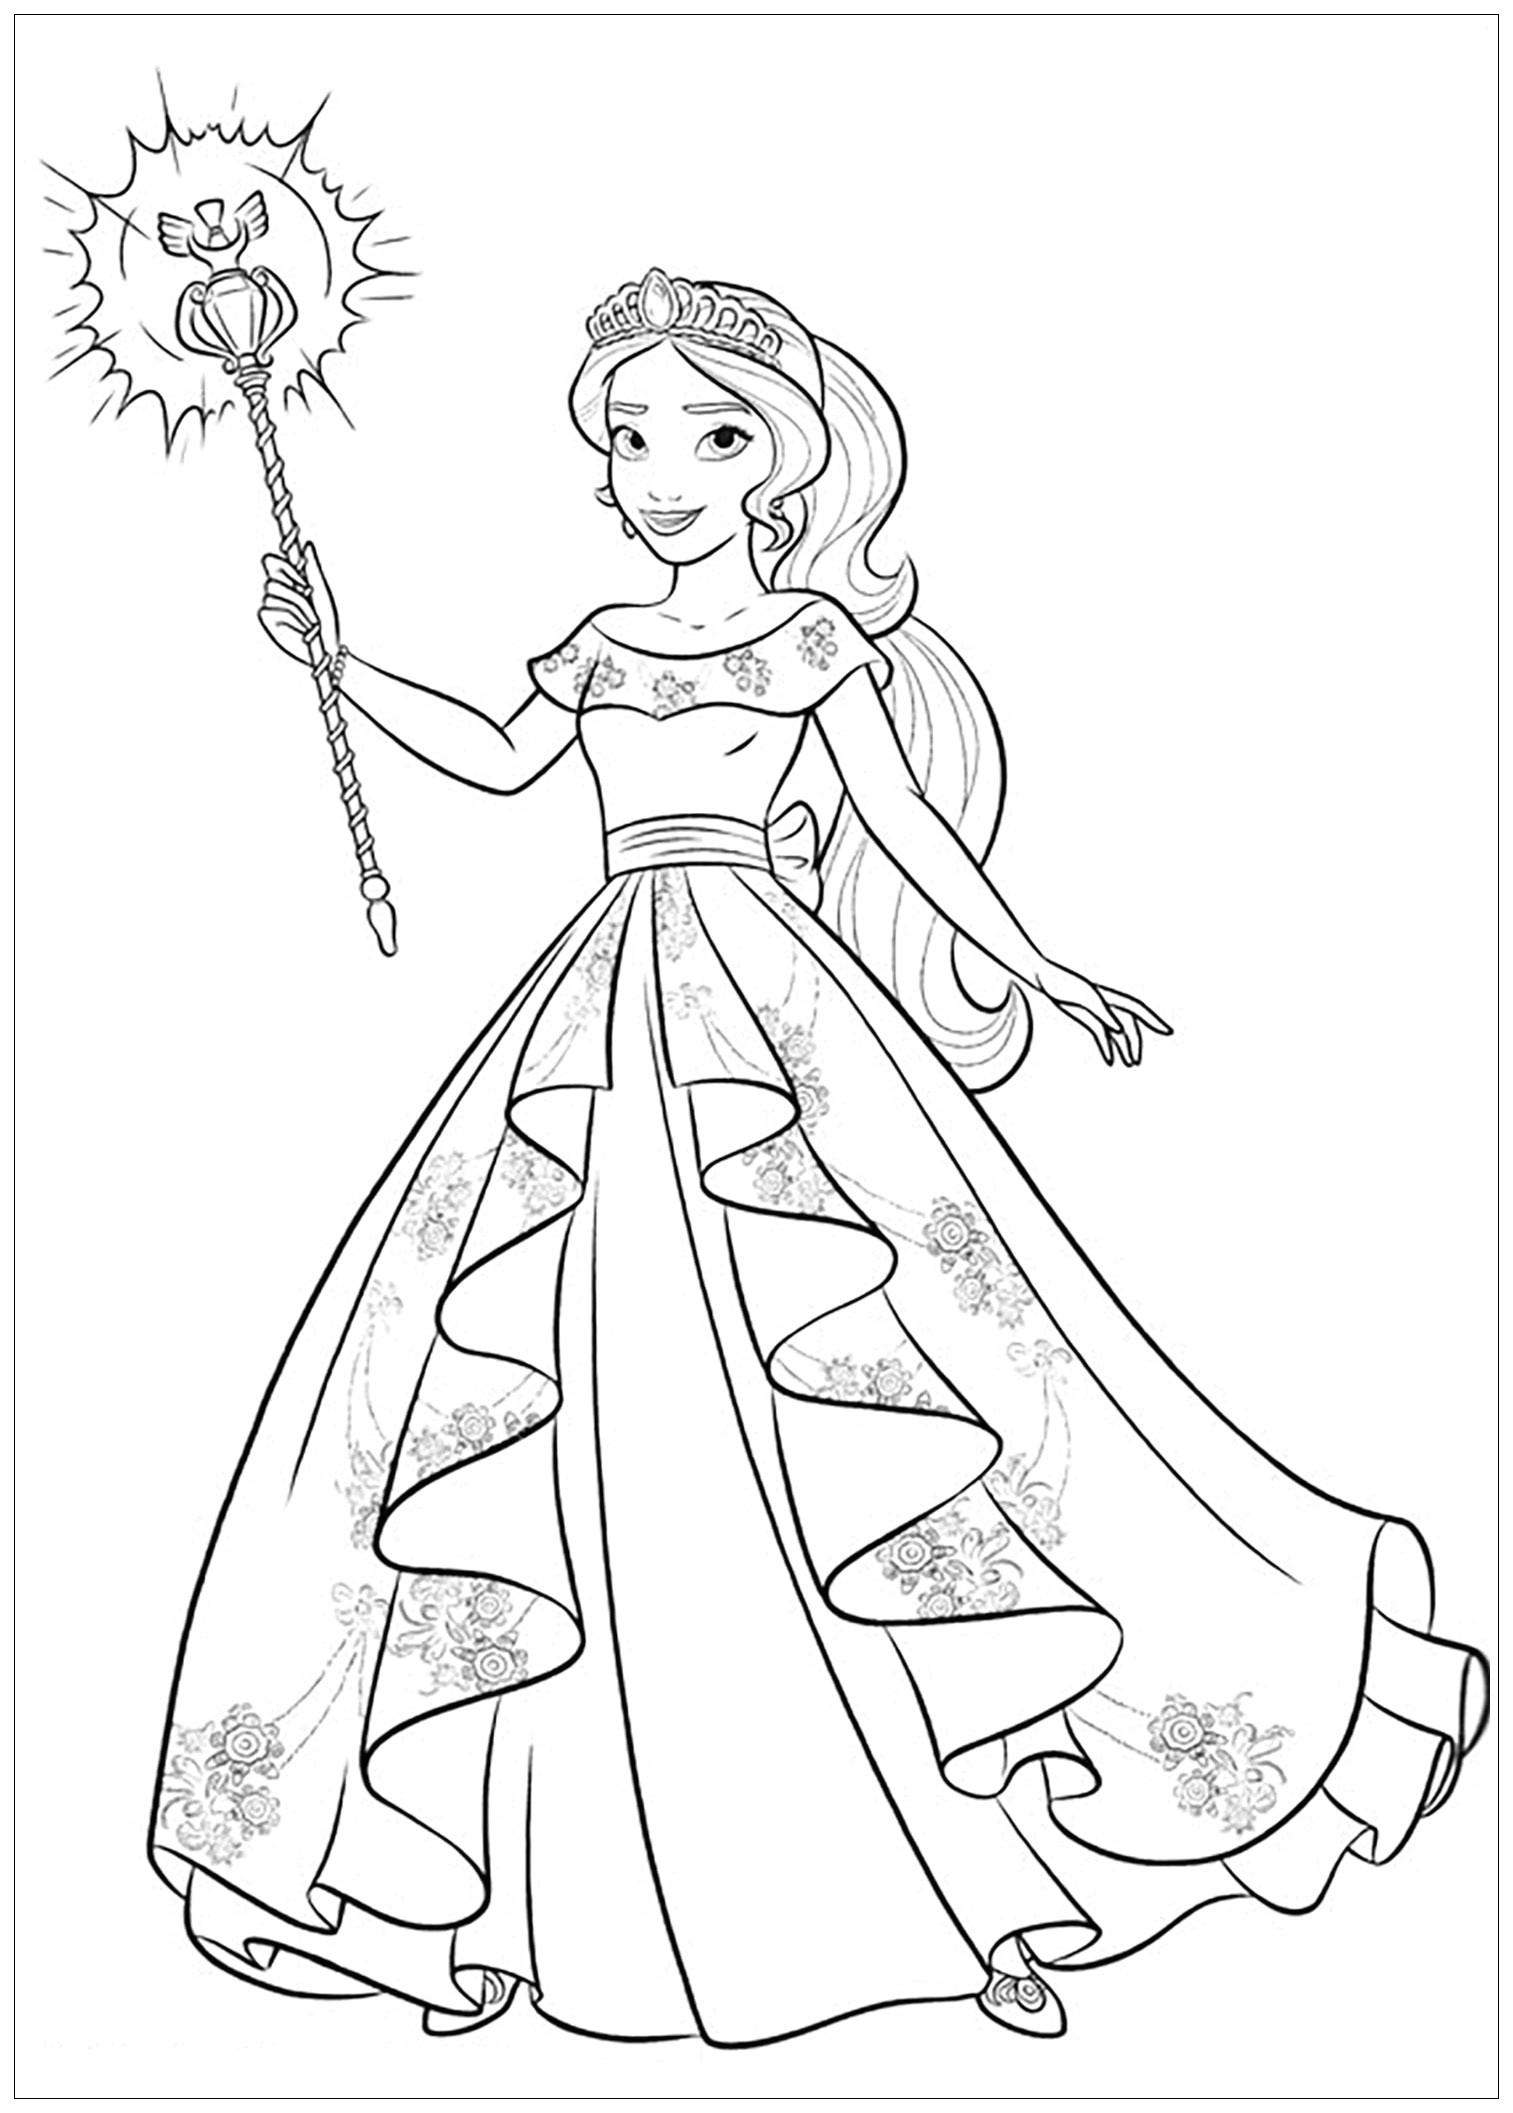 Elena Avalor coloring page with few details for kids